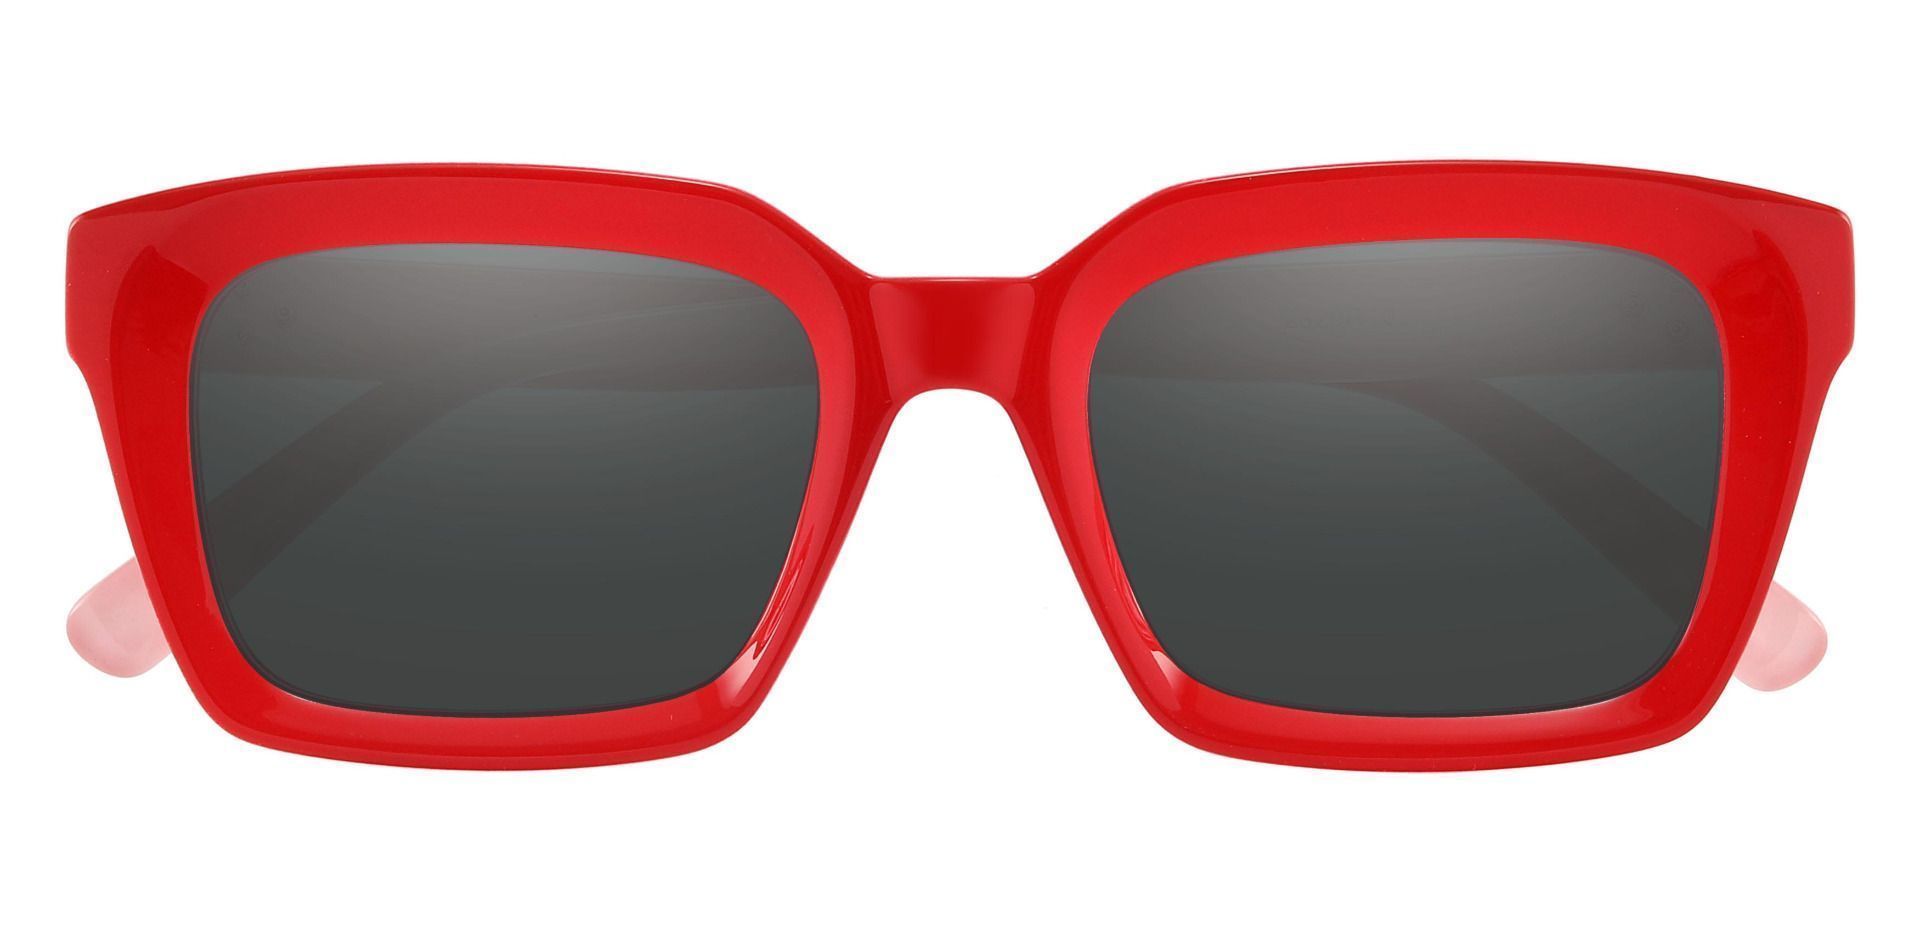 Unity Rectangle Reading Sunglasses - Red Frame With Gray Lenses